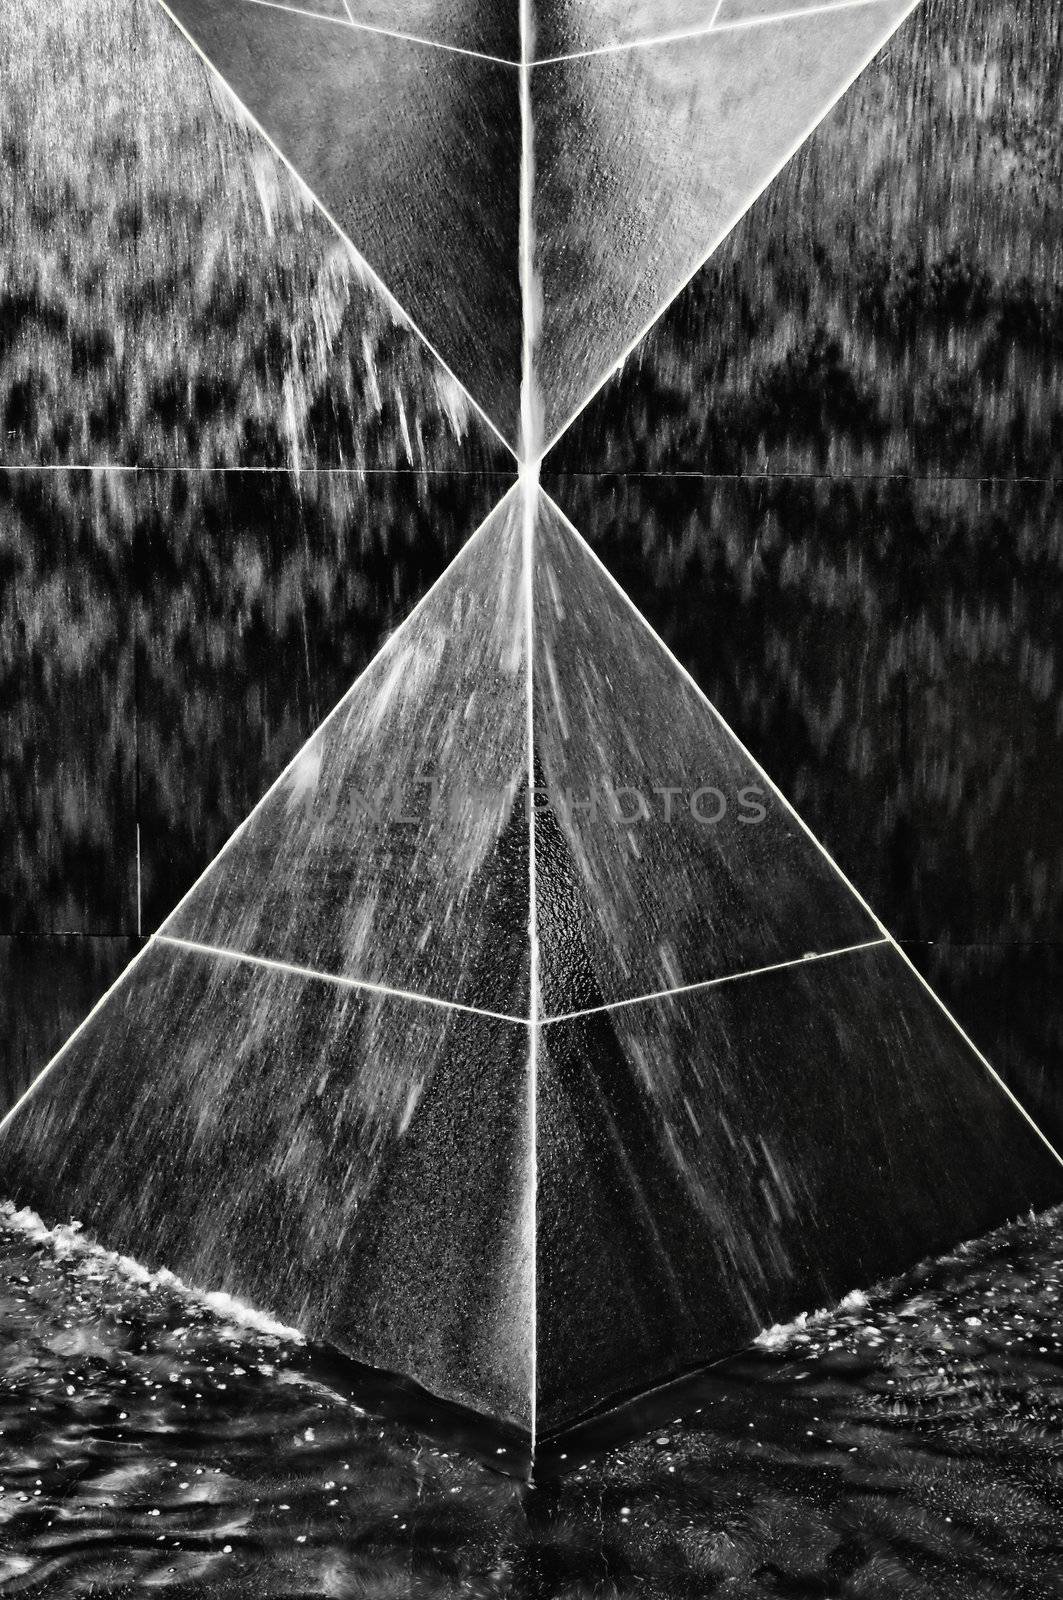 A select portion of a black granite fountain structure with triangular and pyramid geometric shapes.